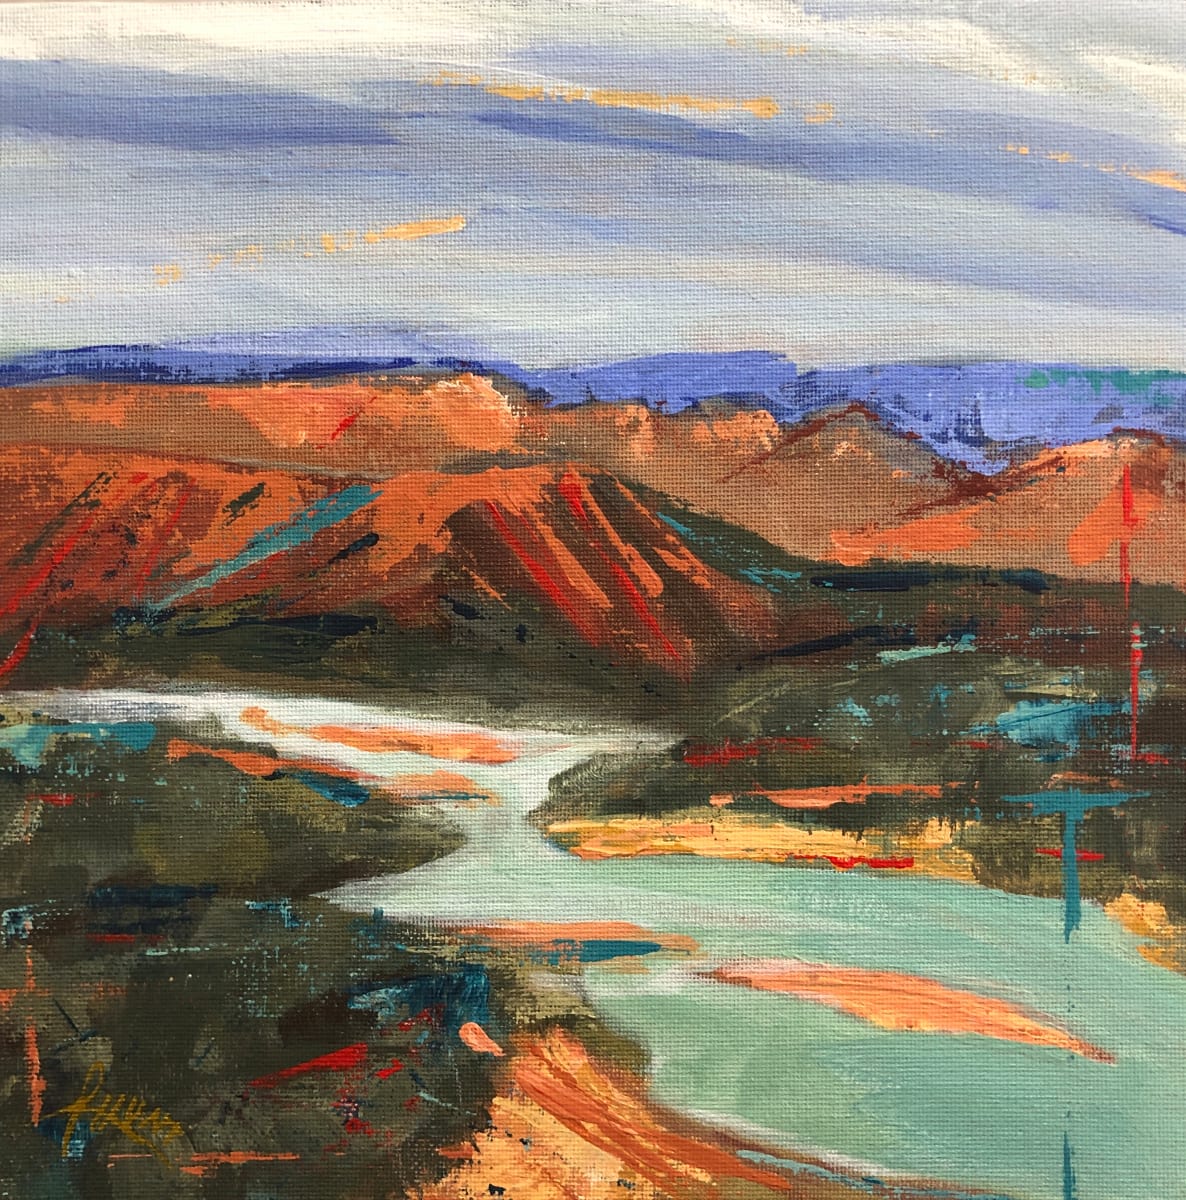 The River Between (Big Bend) by Laura Hunt  Image: The River Between (Big Bend) by Laura Hunt